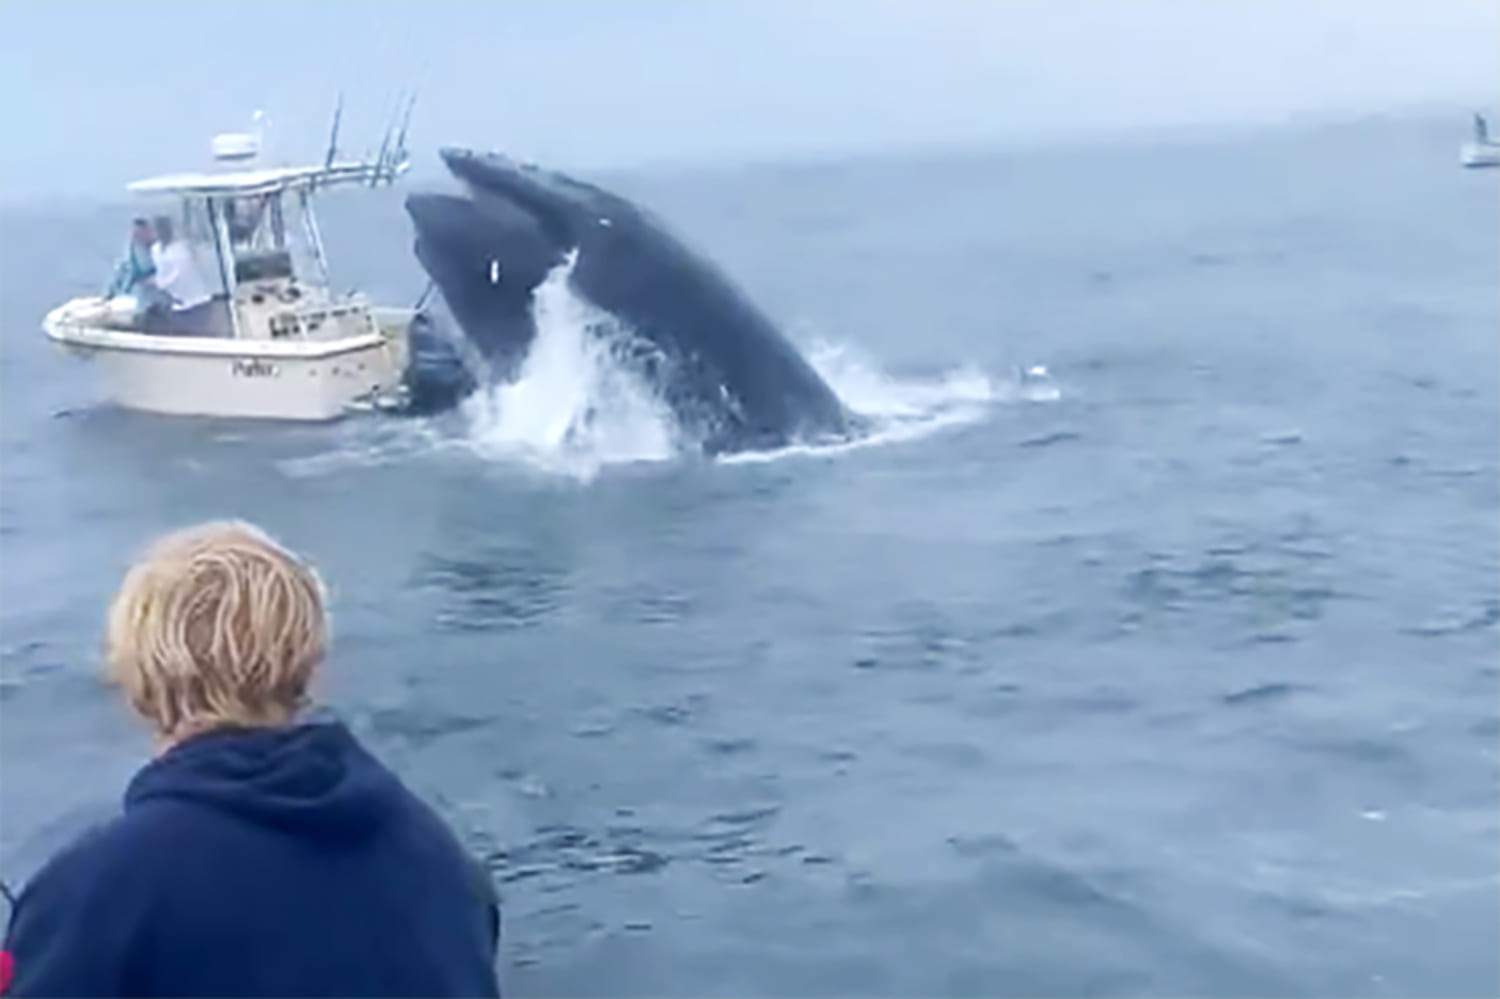 Dramatic video shows whale capsizing boat off New Hampshire coast